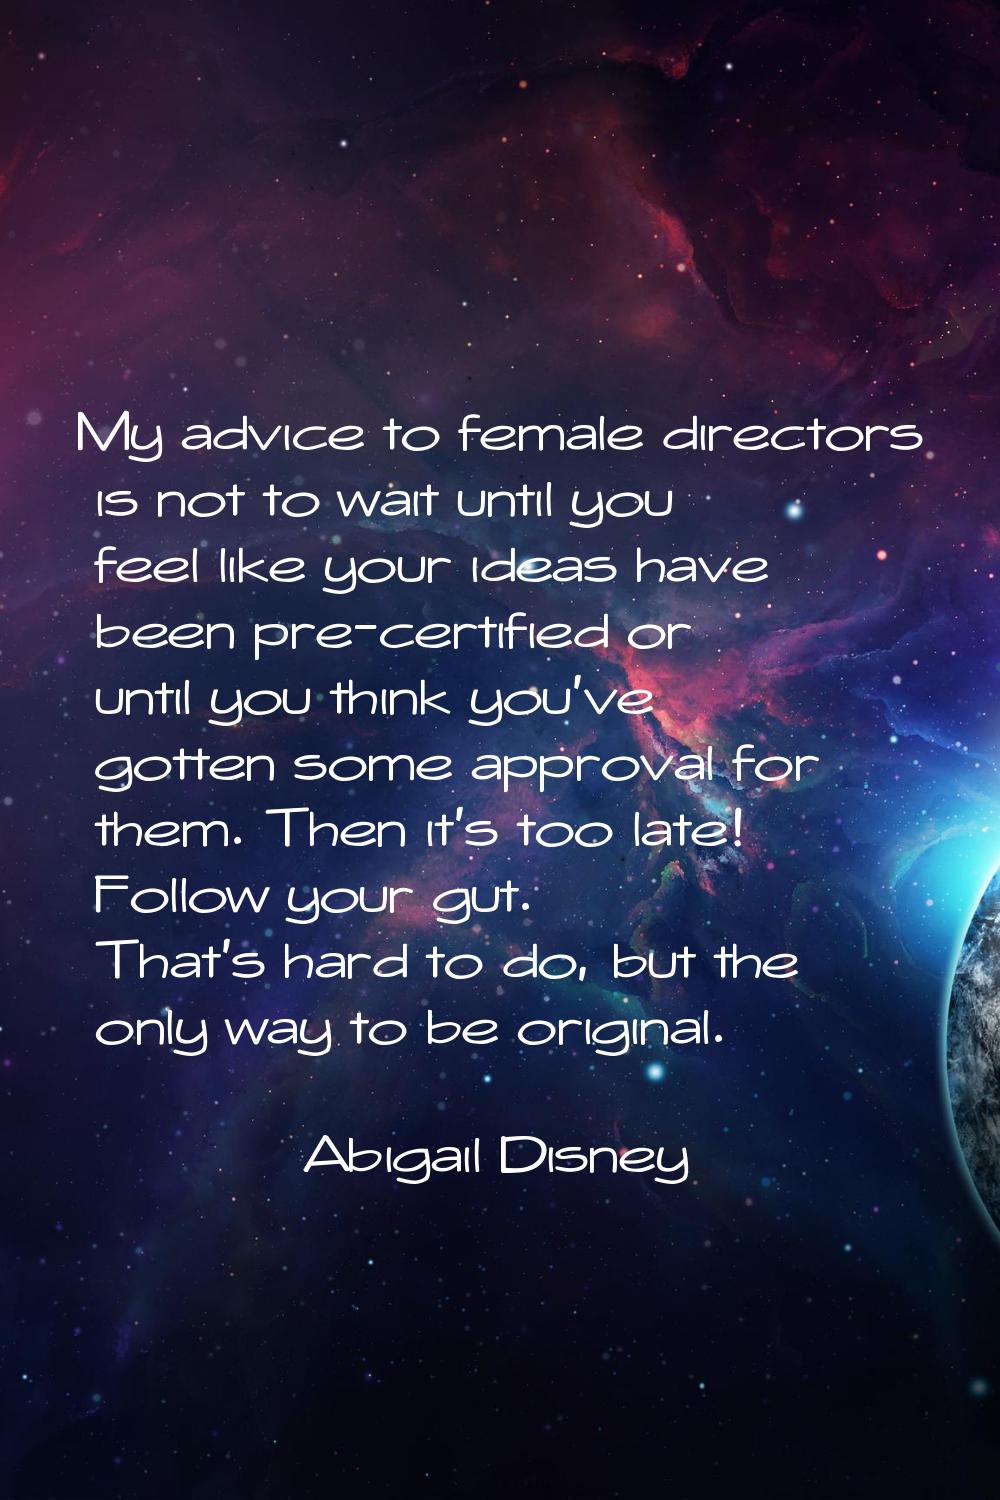 My advice to female directors is not to wait until you feel like your ideas have been pre-certified